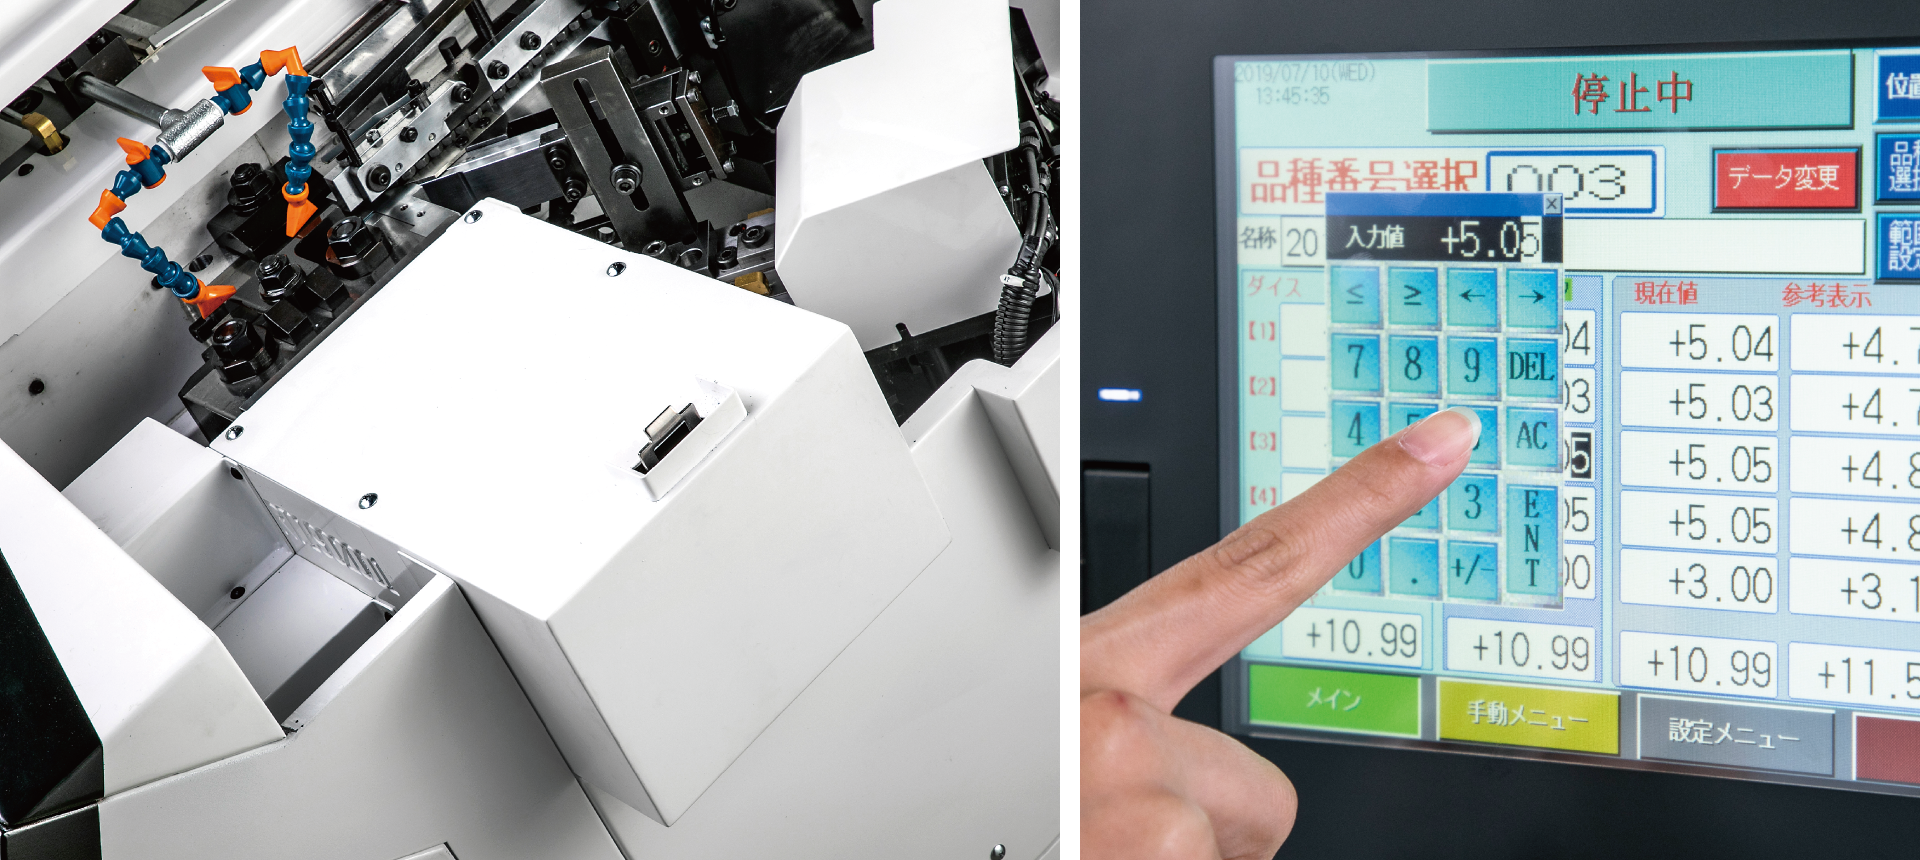 Numerical die positioning using touch panel